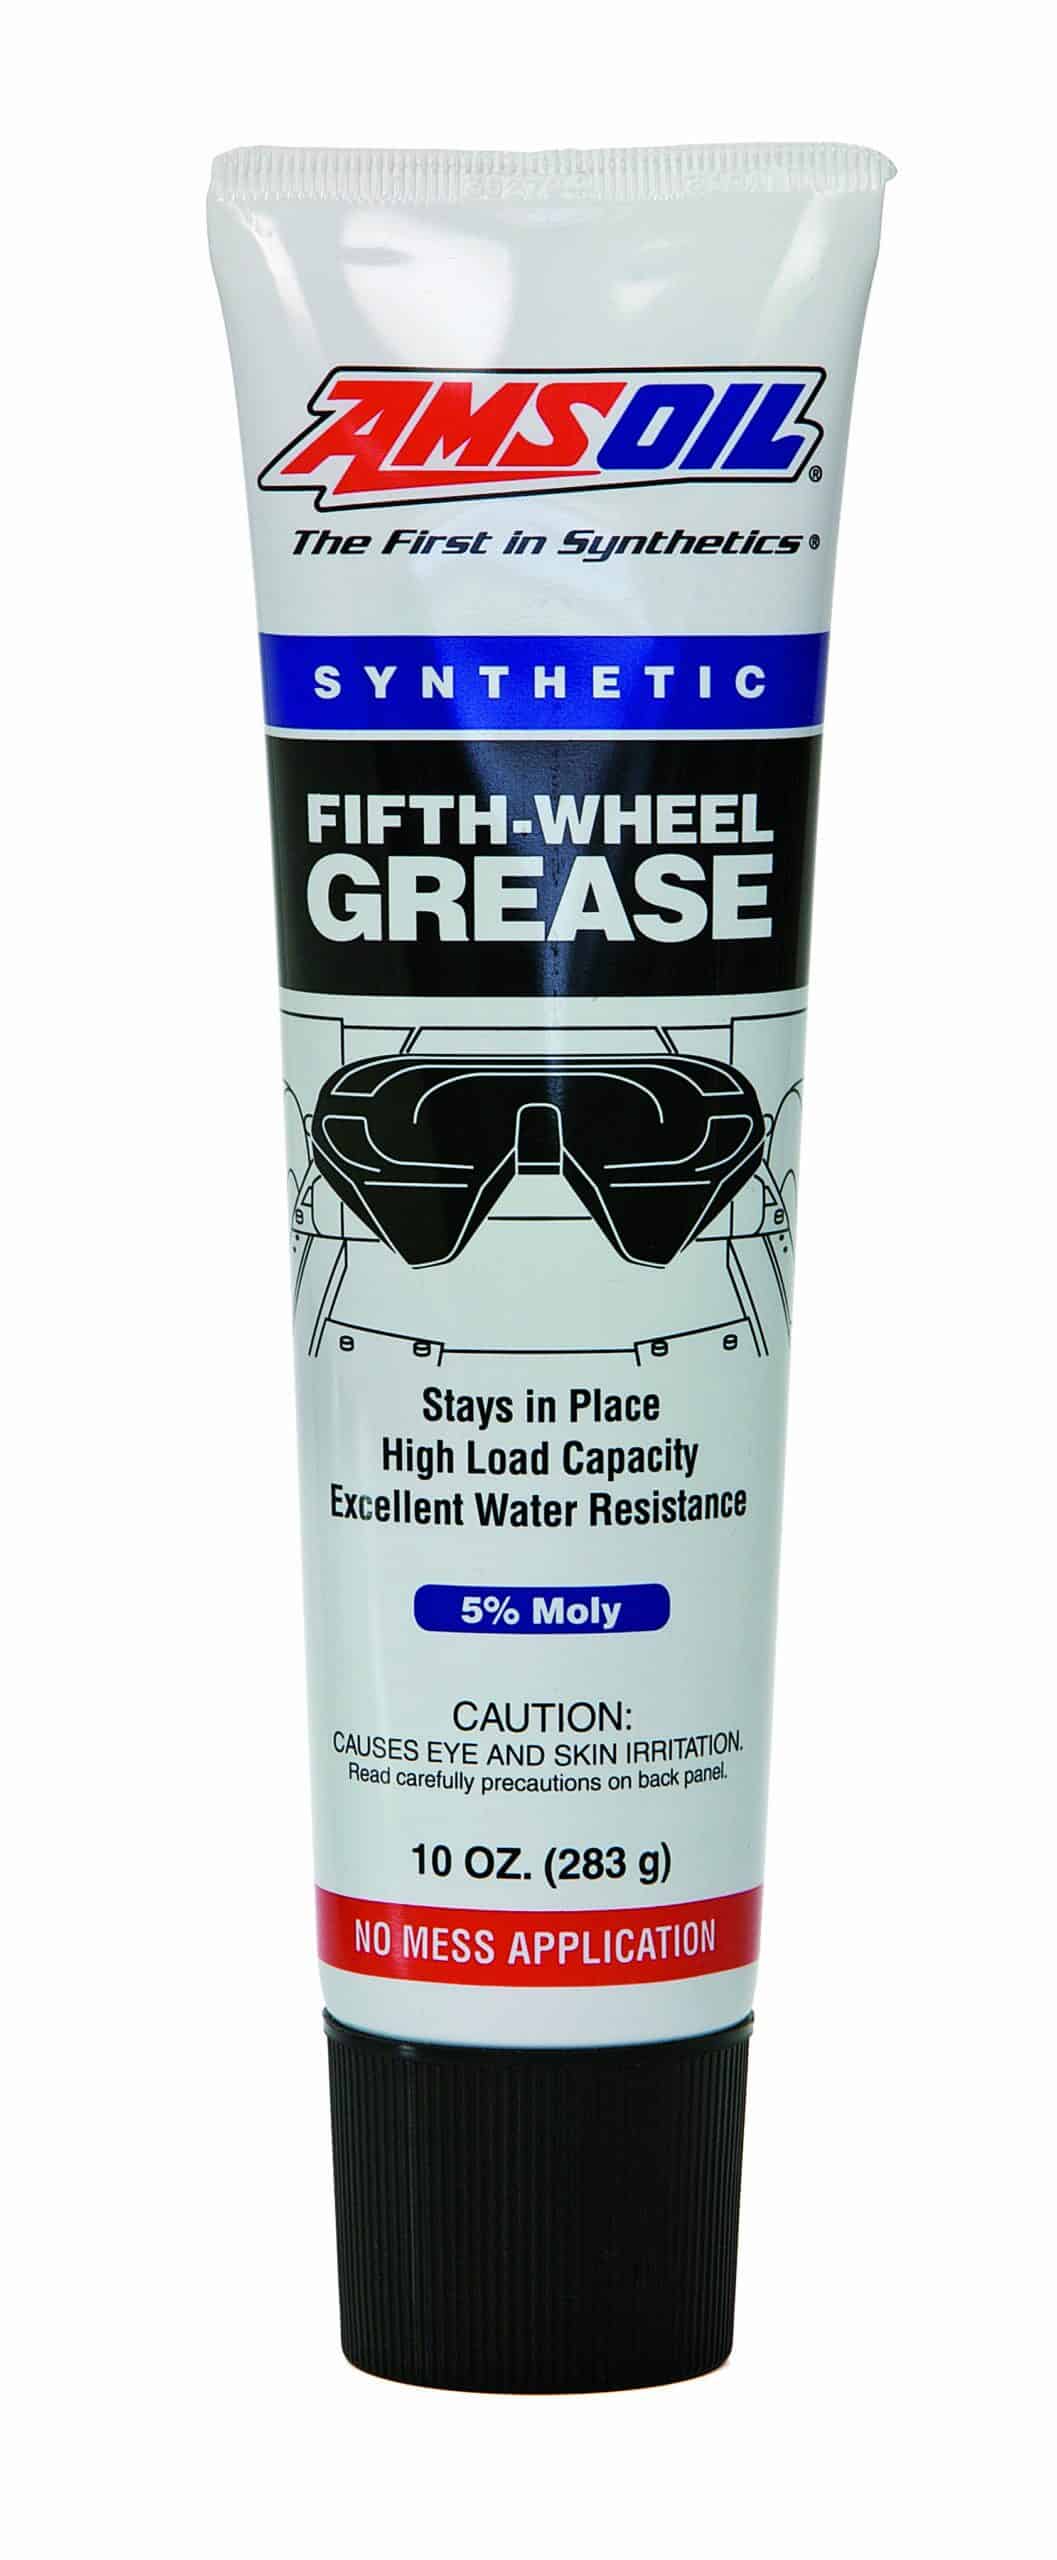 A tube of AMSOIL Synthetic Fifth-Wheel Grease, designed to deliver protection against wear and corrosion, provide long service life, withstand high loads and pressures.